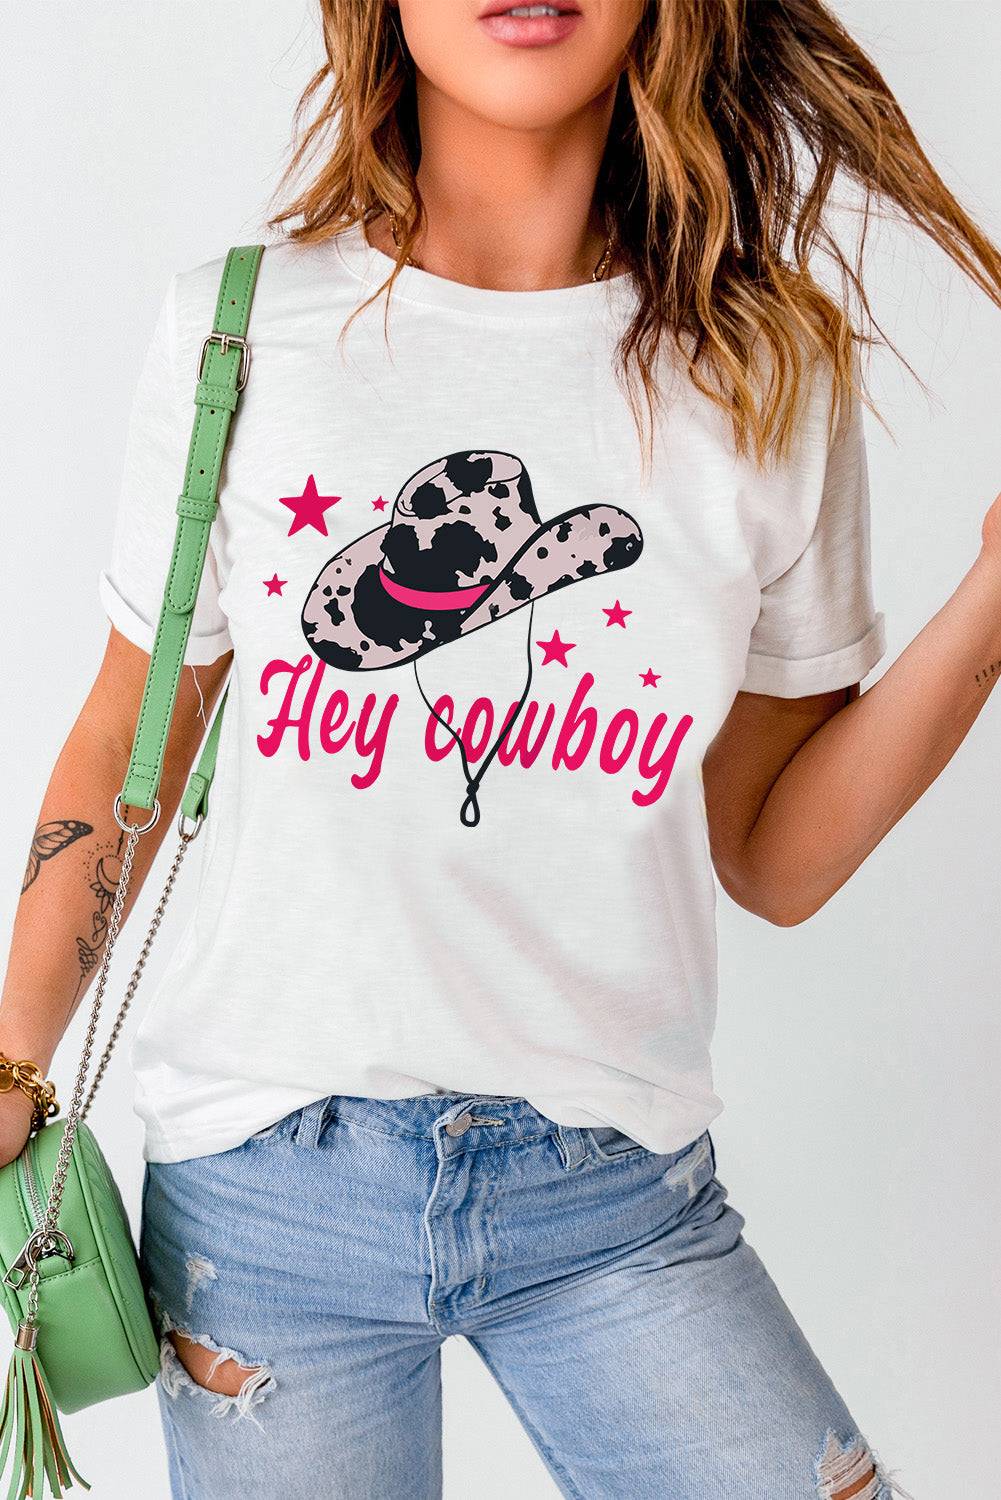 a woman wearing a tee shirt that says hey cowboy